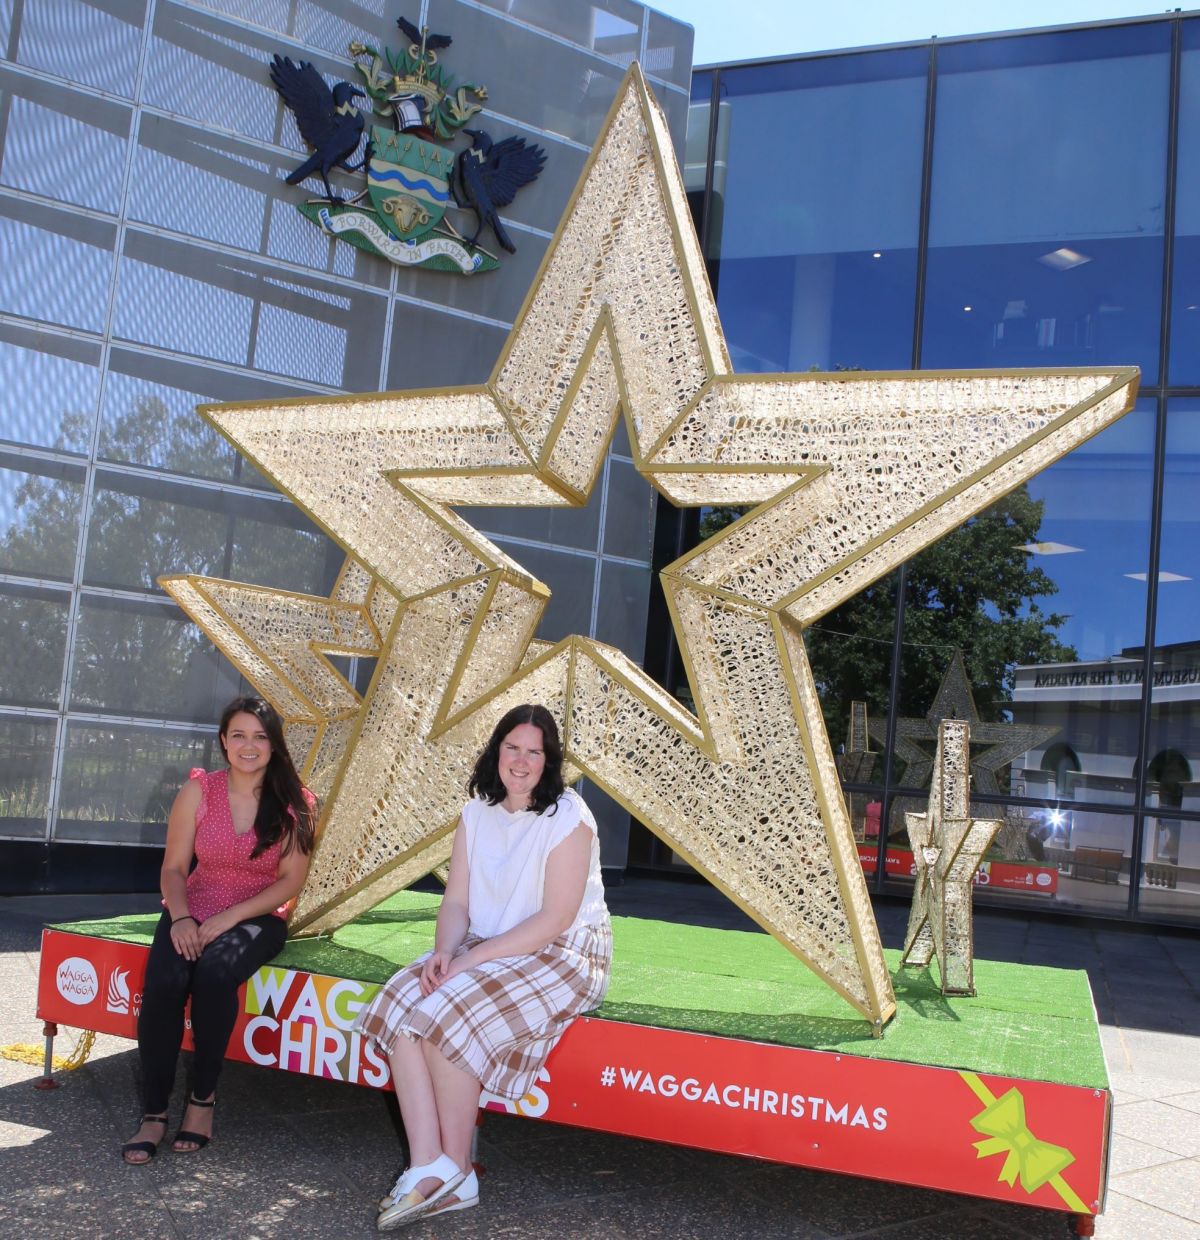 Two women sit in front of a large star